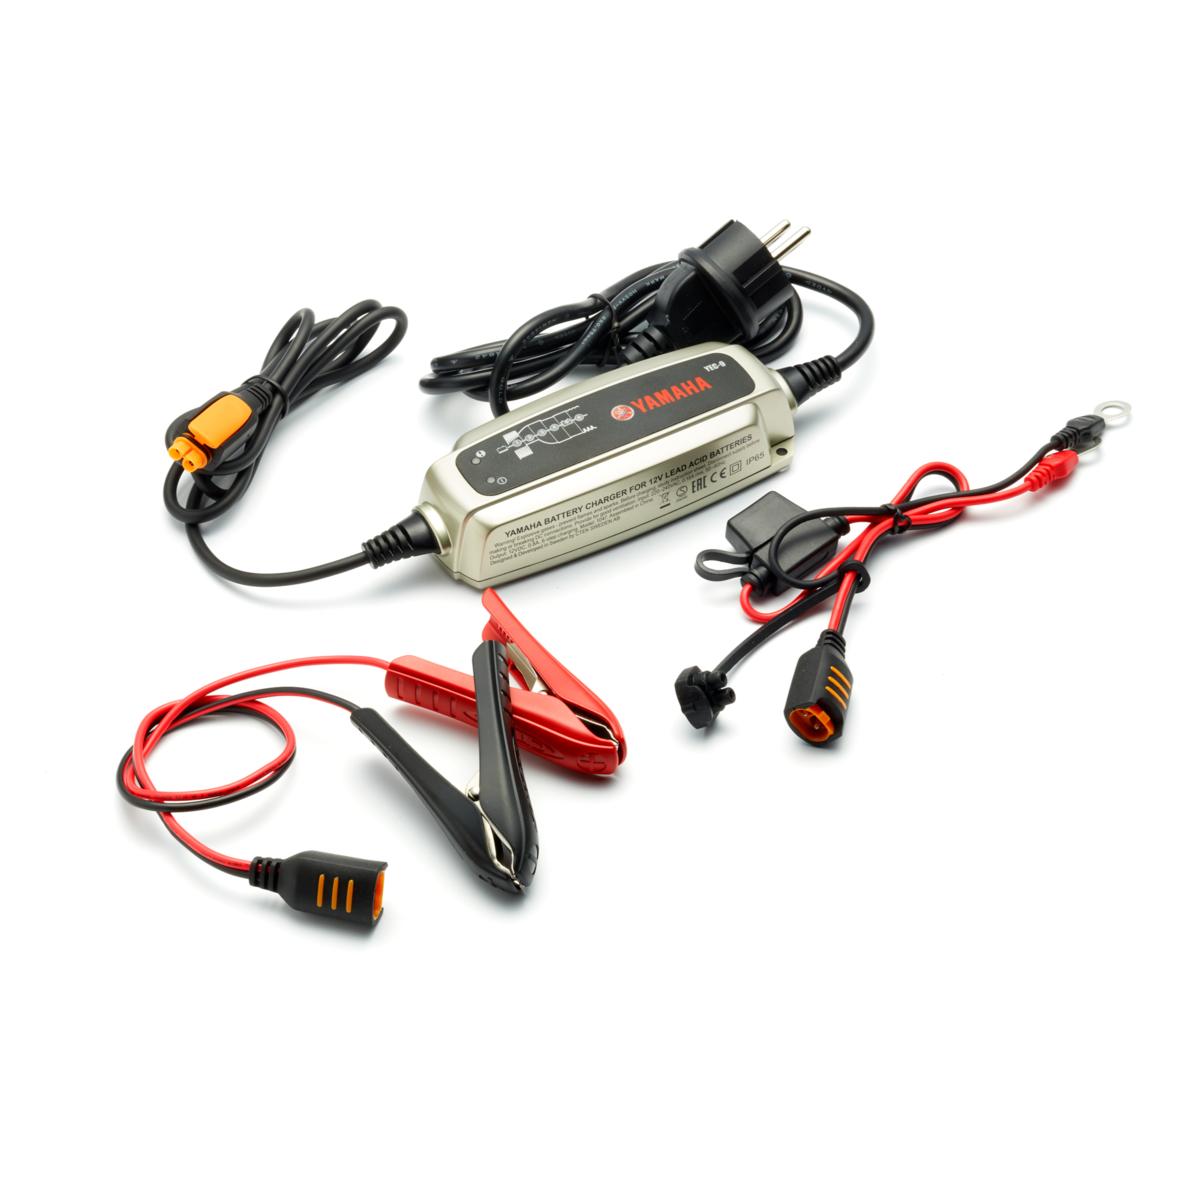 6-step charger that can charge the battery of your Yamaha motorcycle, scooter, ATV, SMB and/or marine products.